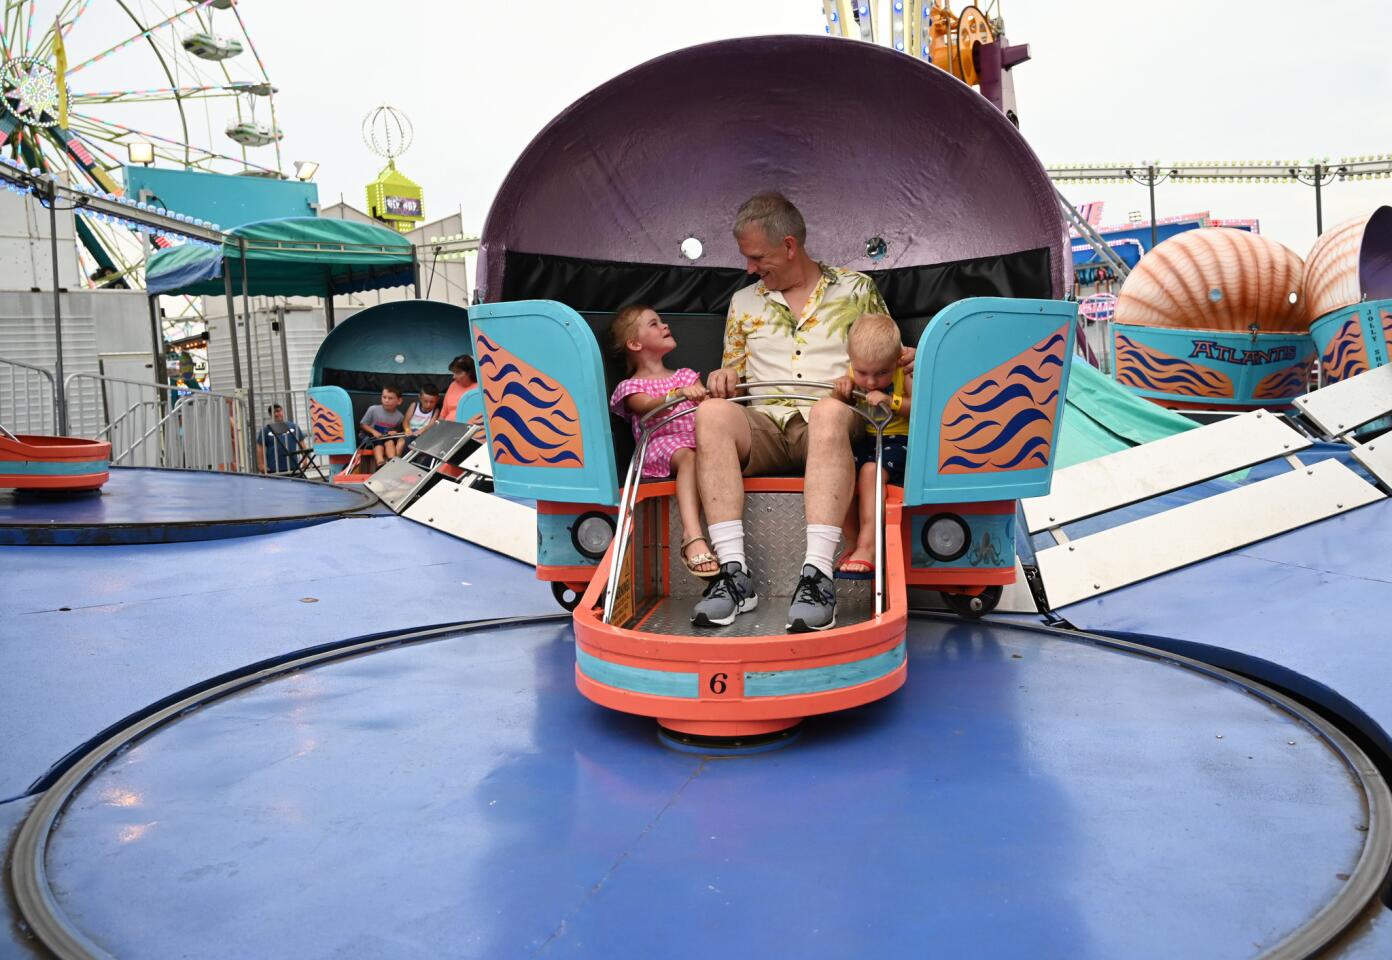 Dan Summerhill of Hampstead enjoys a ride with his grandchildren Emma and Conor during the carnival at Reese & Community Volunteer Fire Company on Tuesday, July 16.